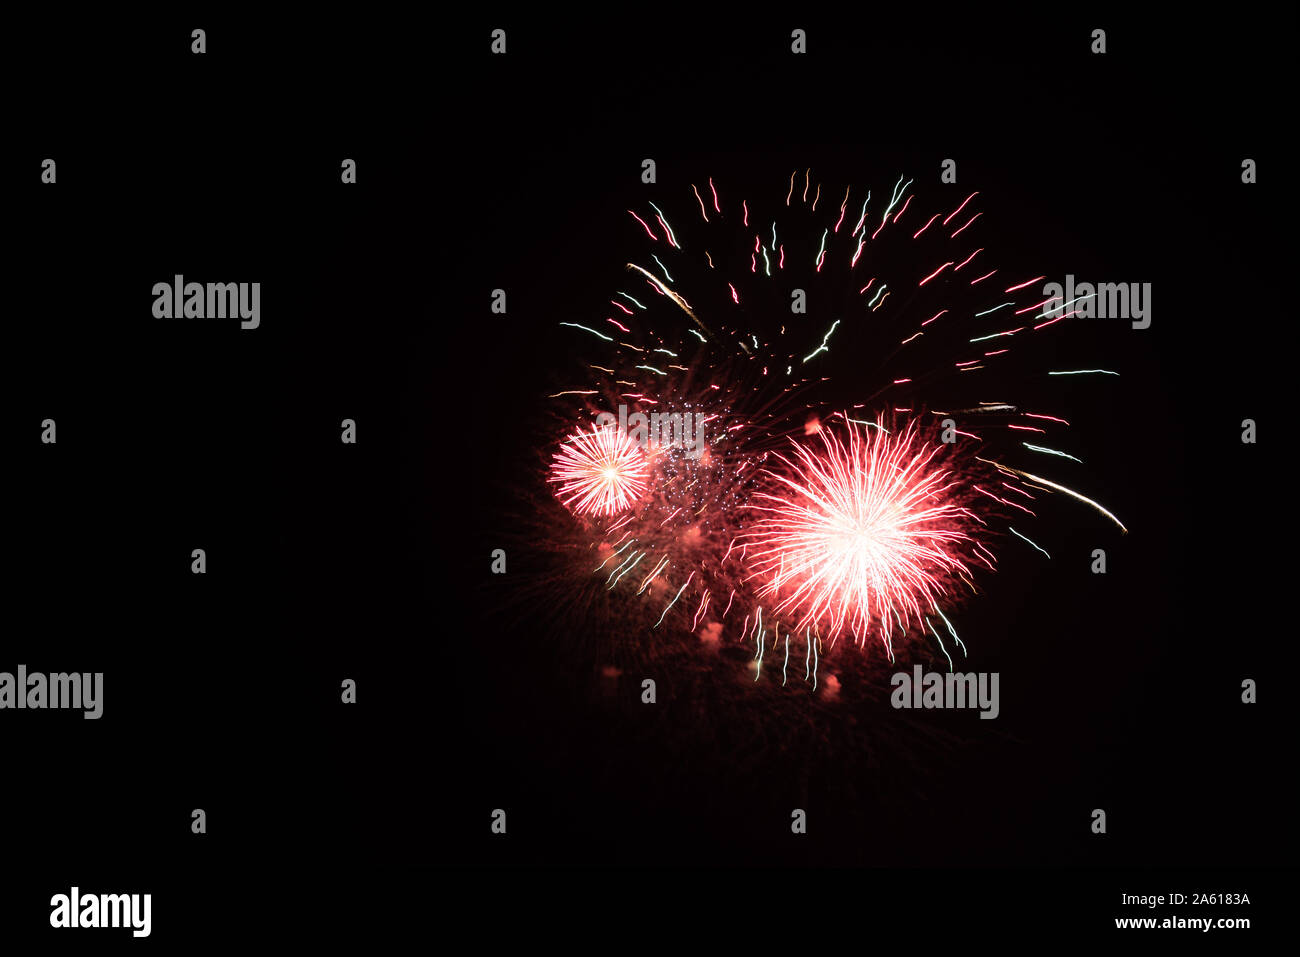 Fireworks photographed in the night sky with a long exposure and black background high quality image good for pc backgrounds and fine art prints. Stock Photo